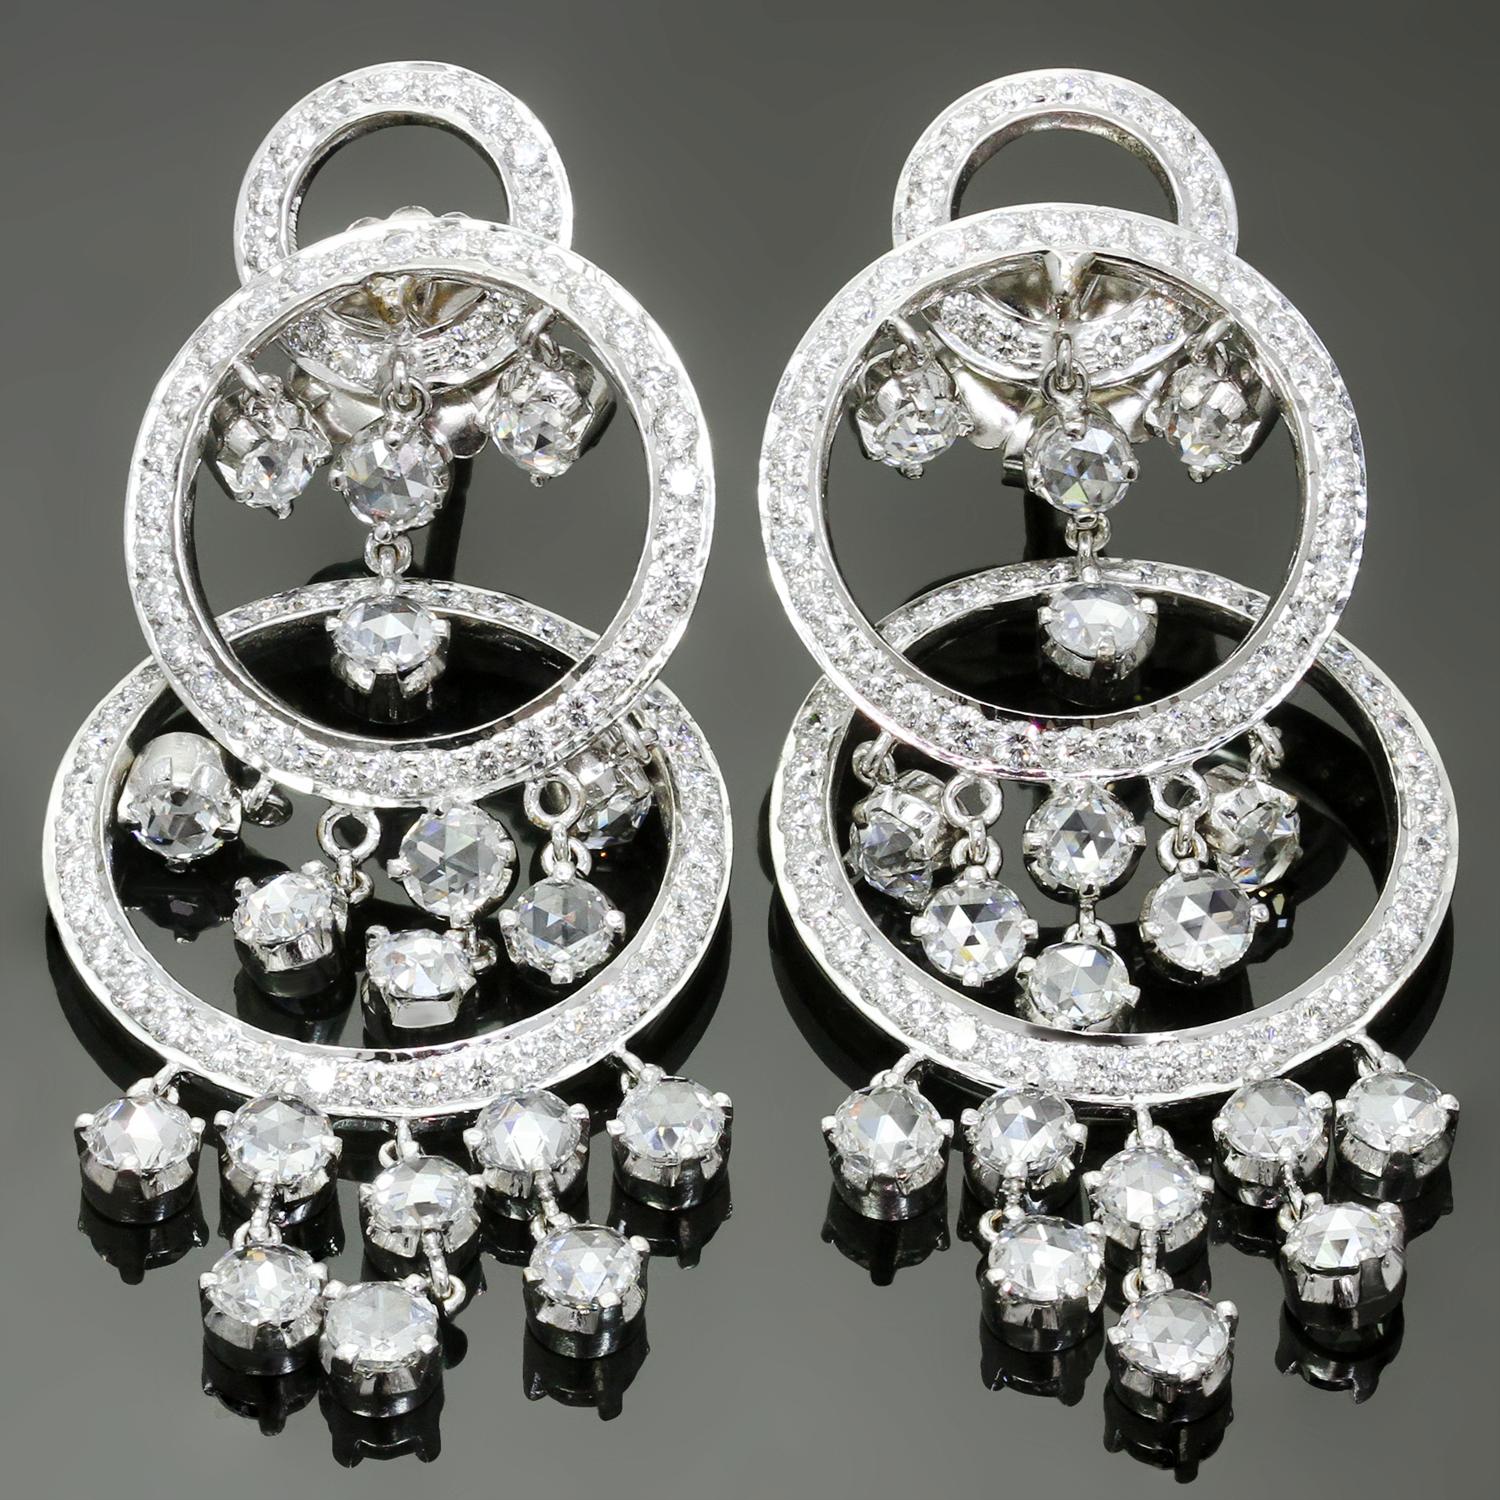 These exquisite modern earrings feature a fabulous chandelier design crafted in 18k white gold and set with 170 full-cut diamonds weighing an estimated 4.25 carats and 36 rose-cut diamonds weighing an estimated 5.40 carats. The push backs are